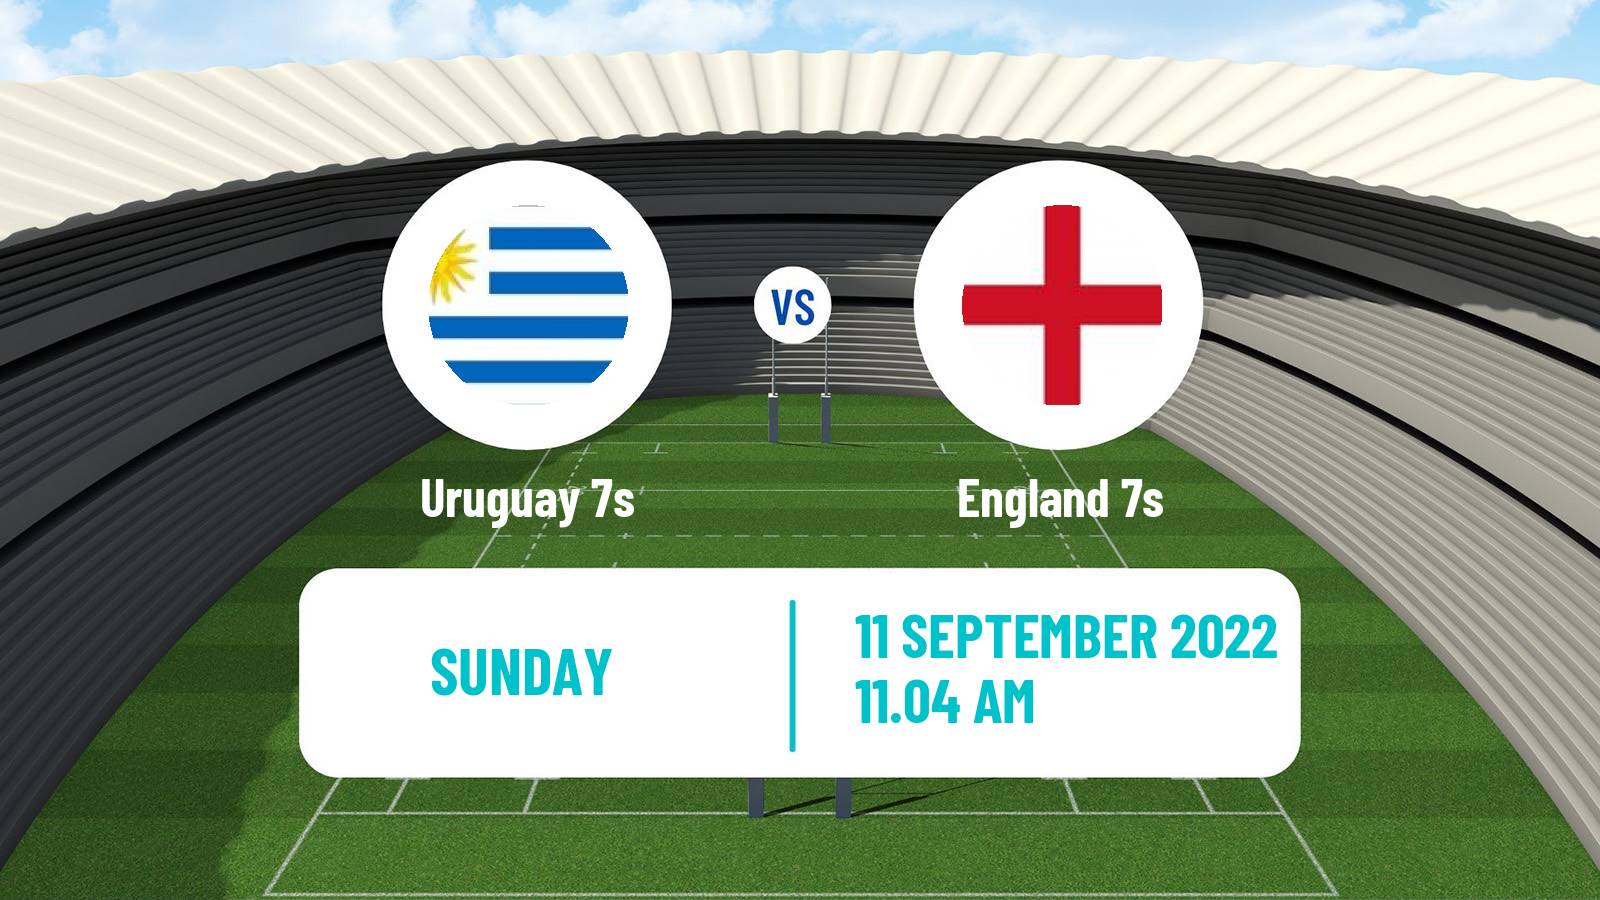 Rugby union Sevens World Cup Uruguay 7s - England 7s